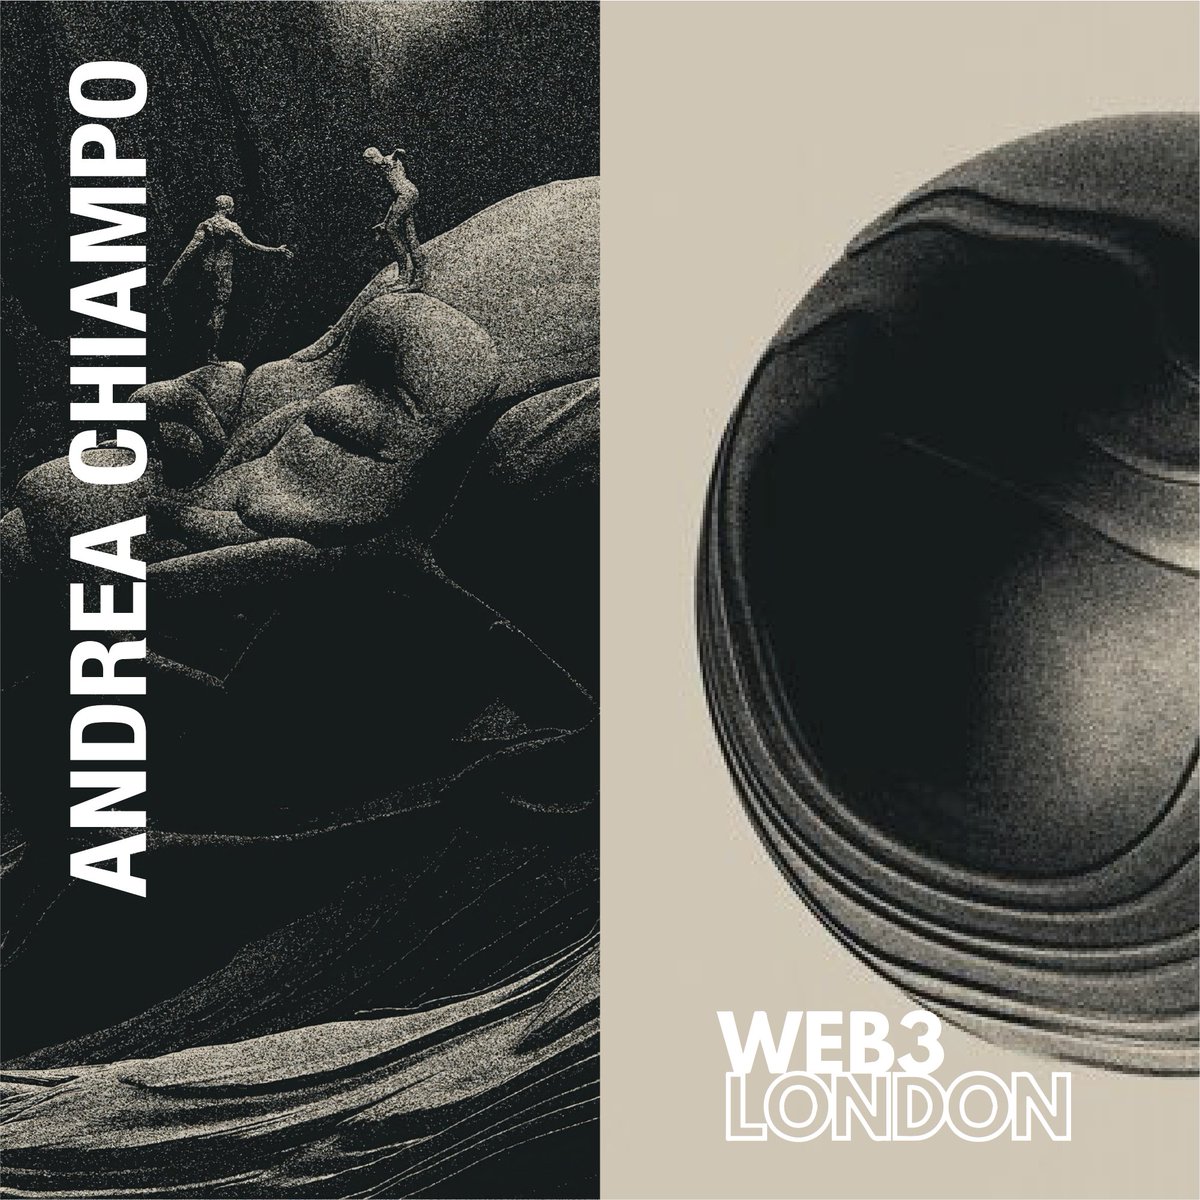 Meet the Artist! 🎨 Explore the surreal and dreamlike world of Andrea Chiampo, one of the featured artists at #Web3London! His eerie and fantastical creations will transport you to otherworldly landscapes. Don't miss the chance to experience his art in person! @Andrea_Chiampo